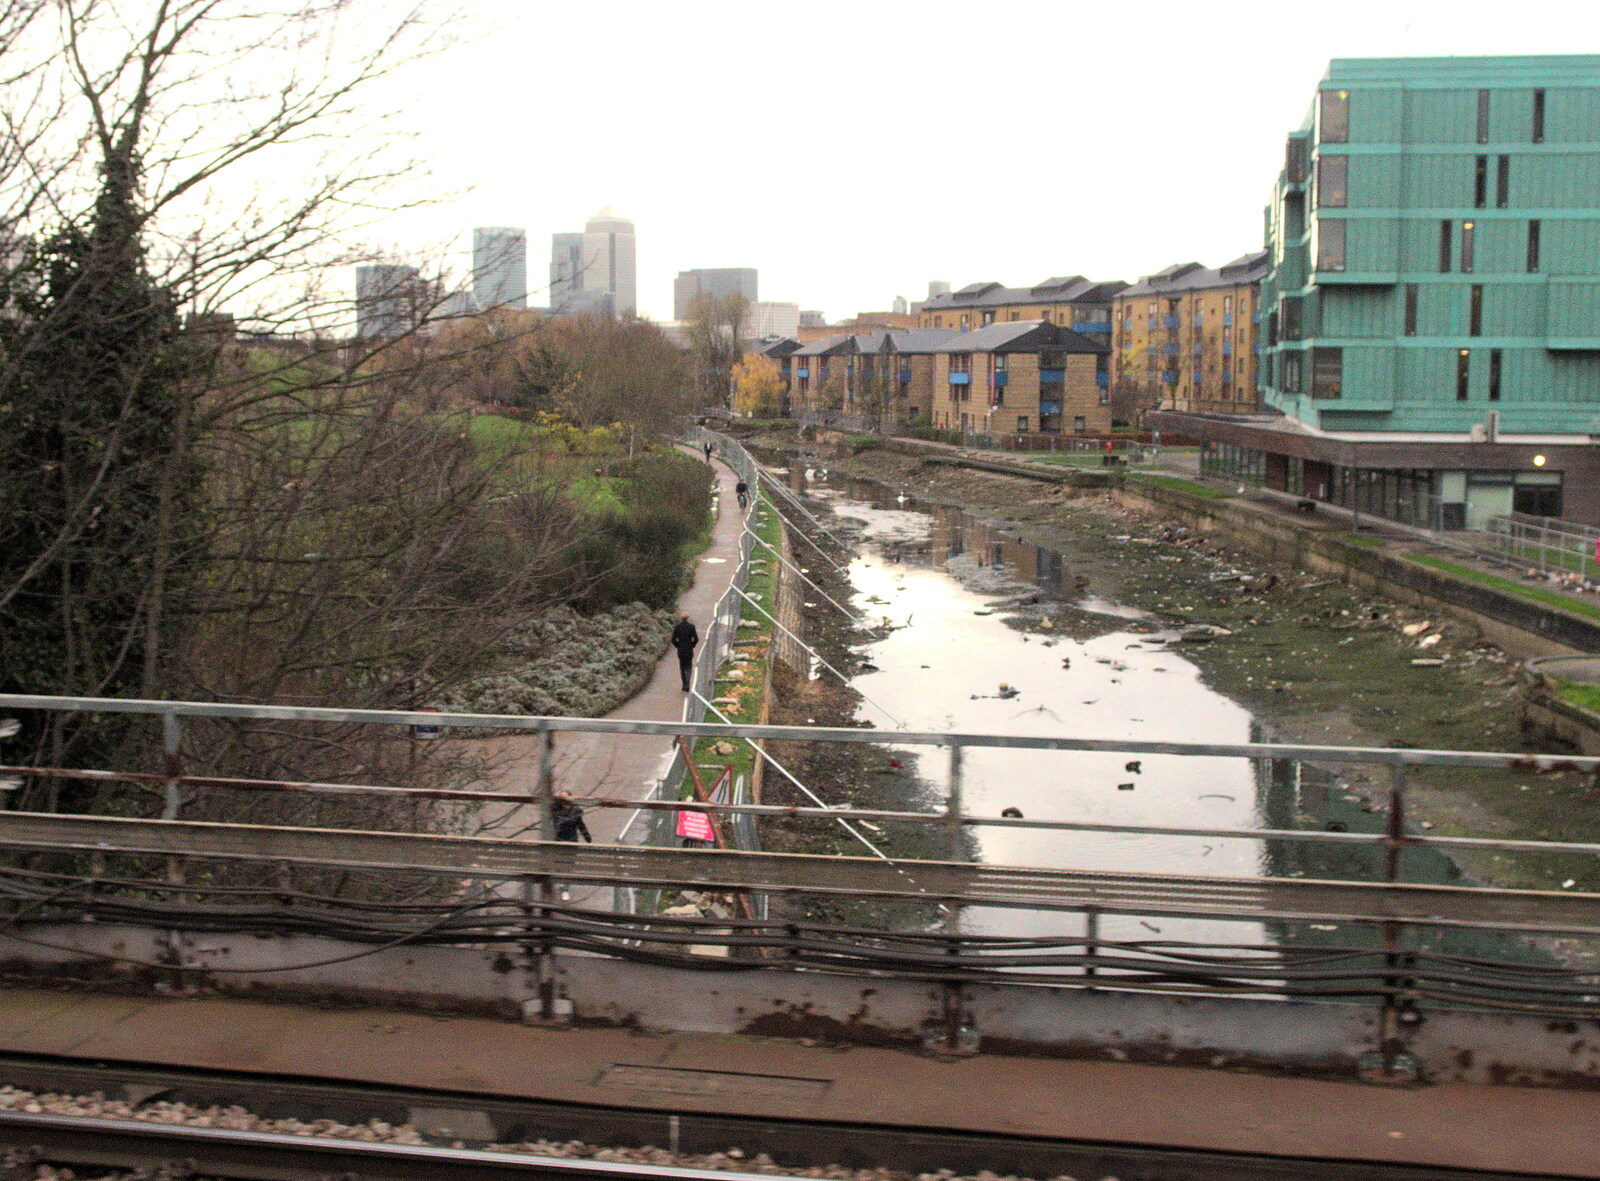 The drained Regent's Canal in Mile End from A London Lunch, Borough, Southwark - 15th December 2015